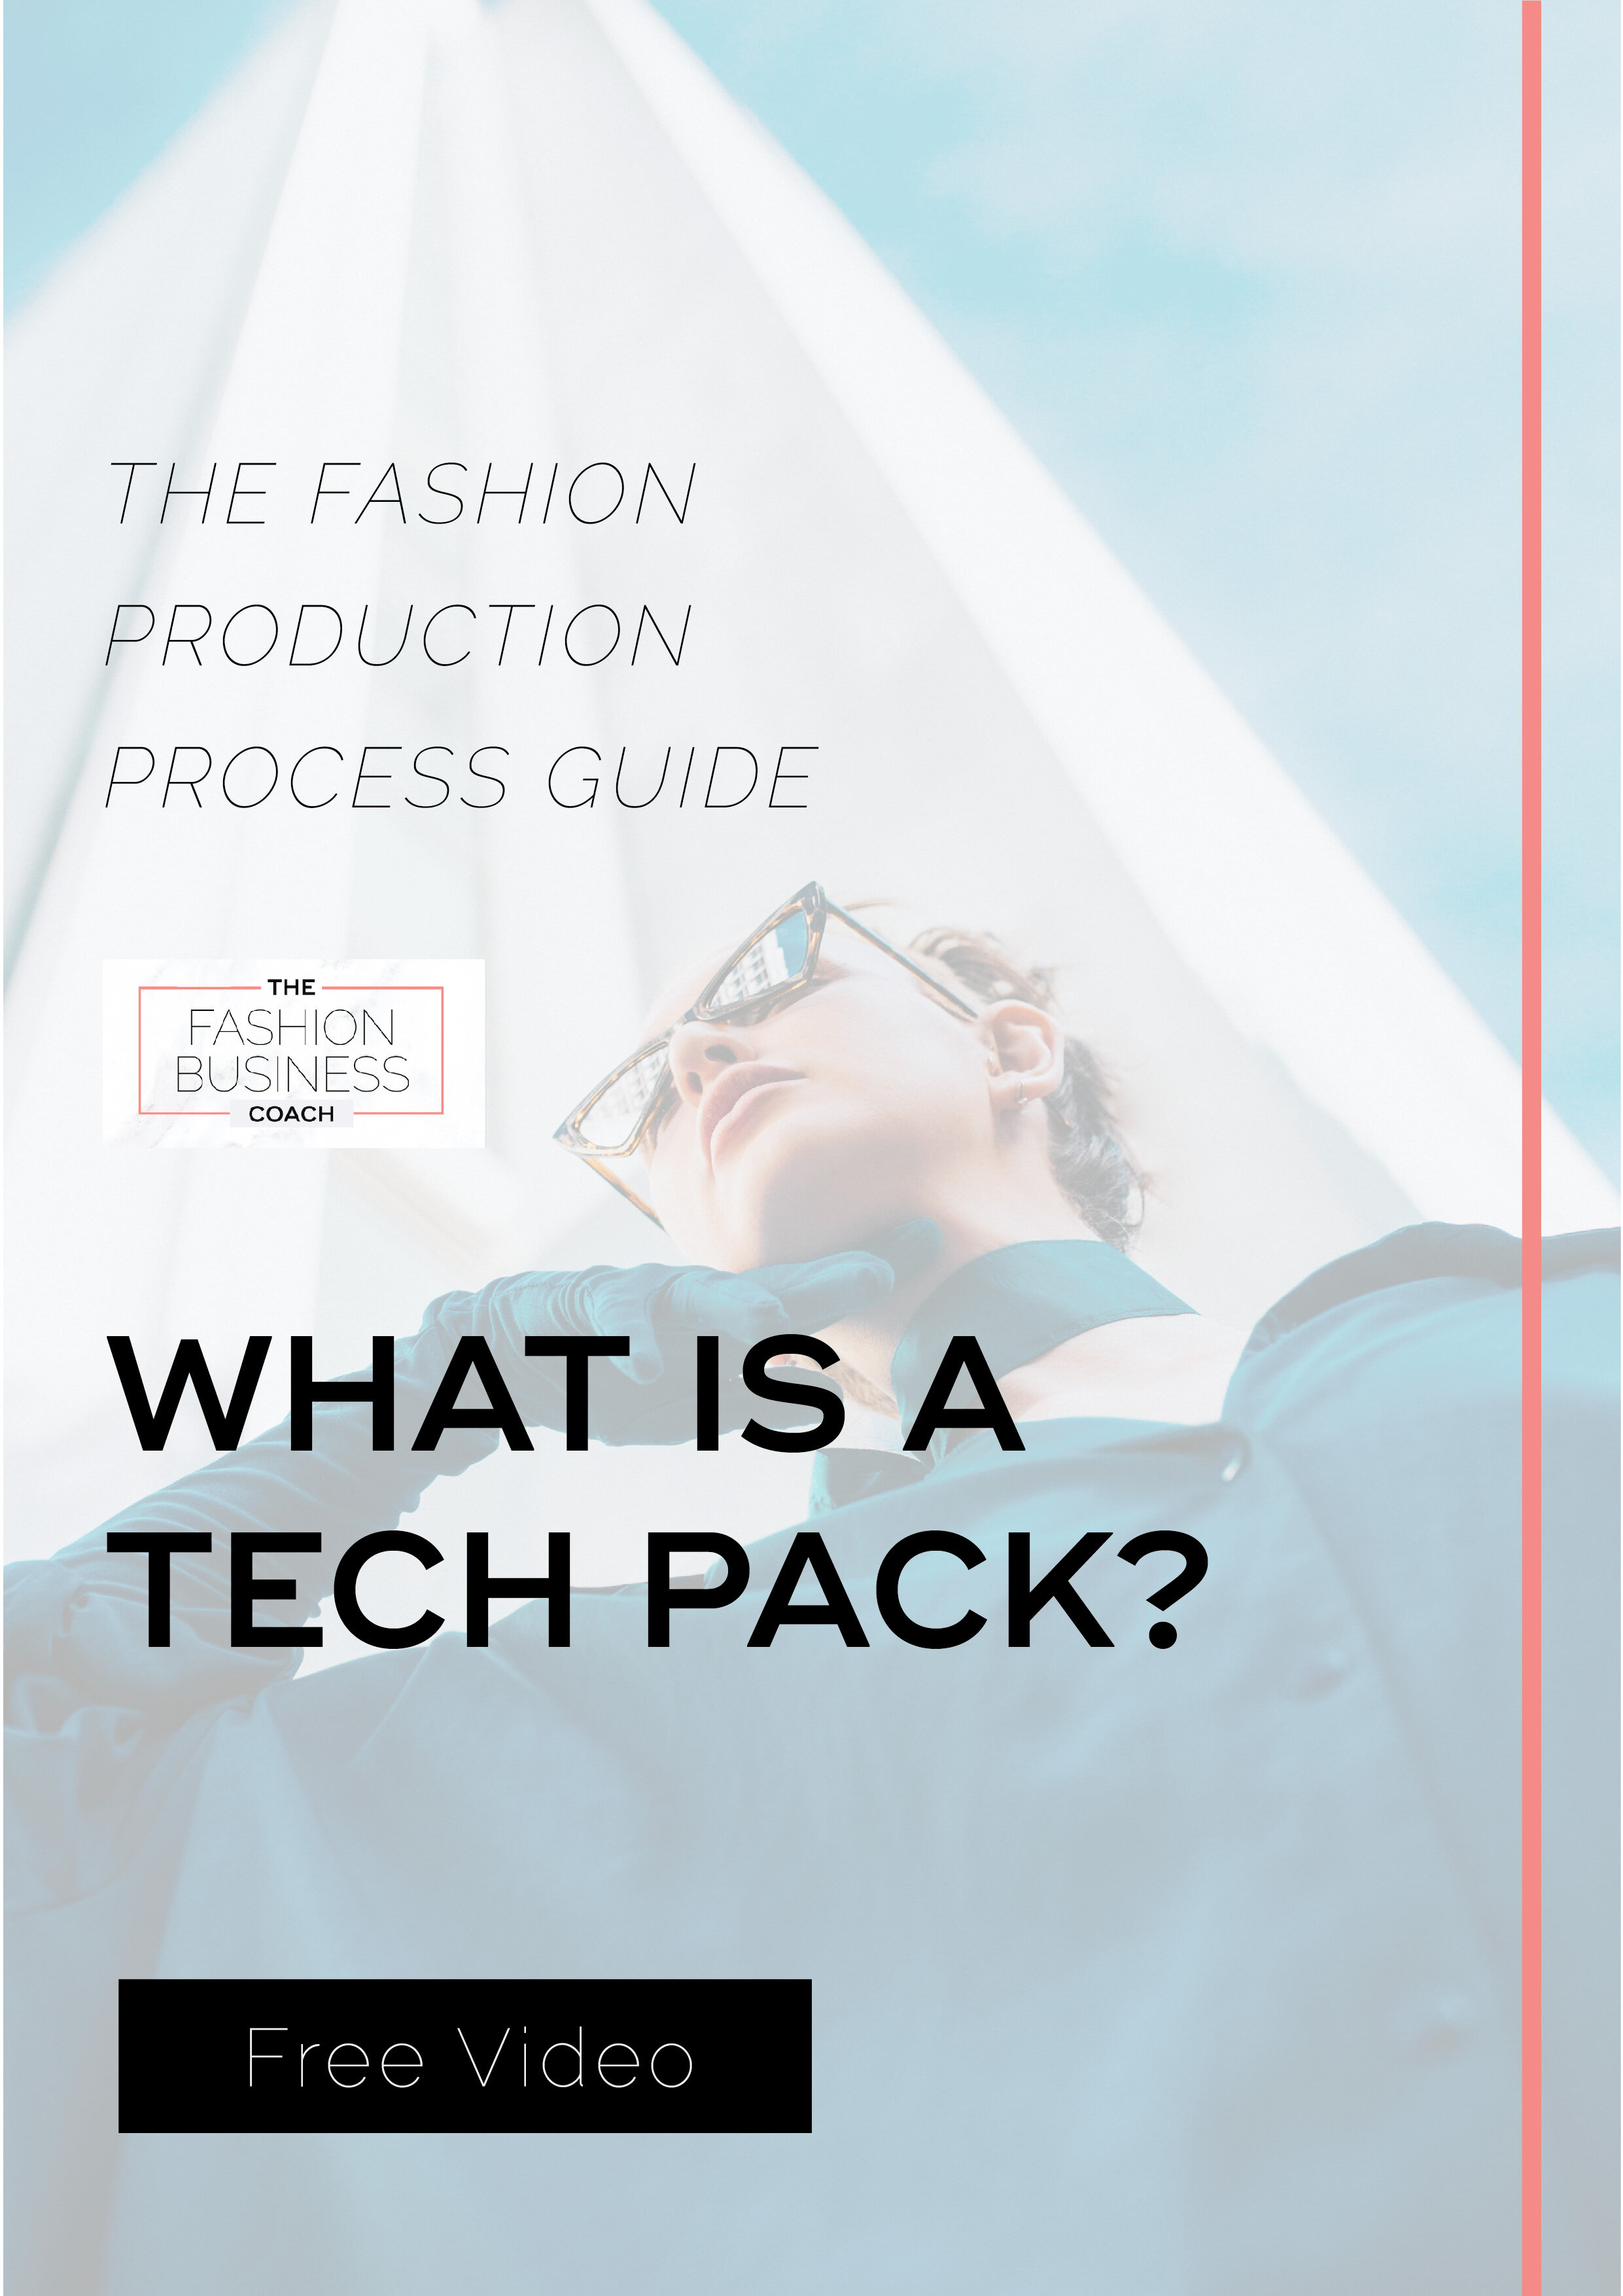 The Fashion Production Process Guide What is a Tech Pack Video.jpg